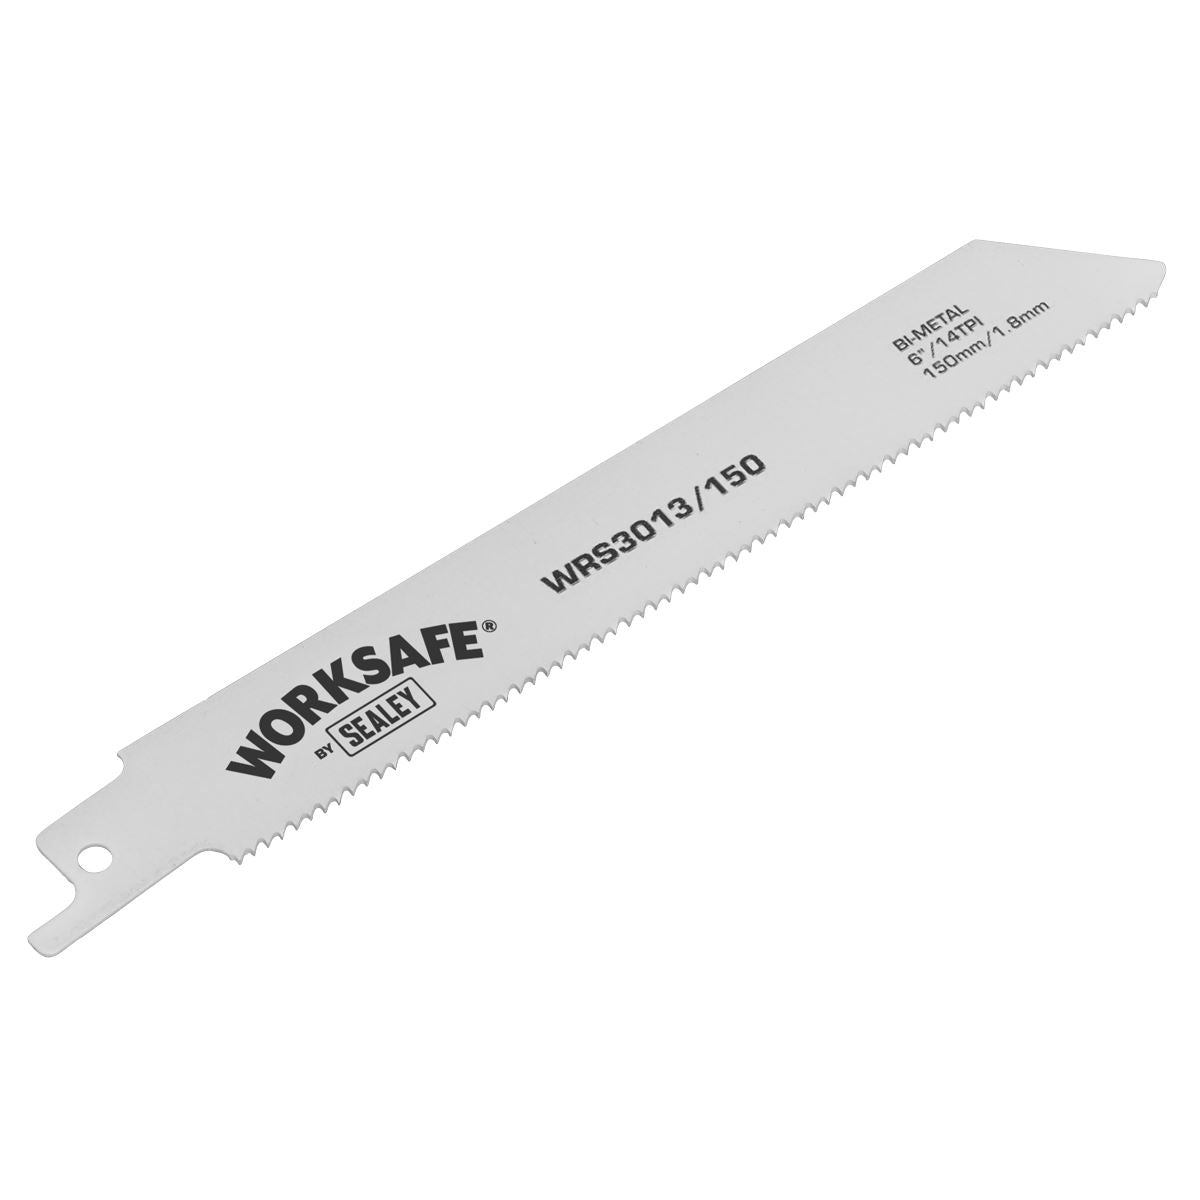 Worksafe by Sealey Reciprocating Saw Blade 150mm 14tpi - Pack of 5